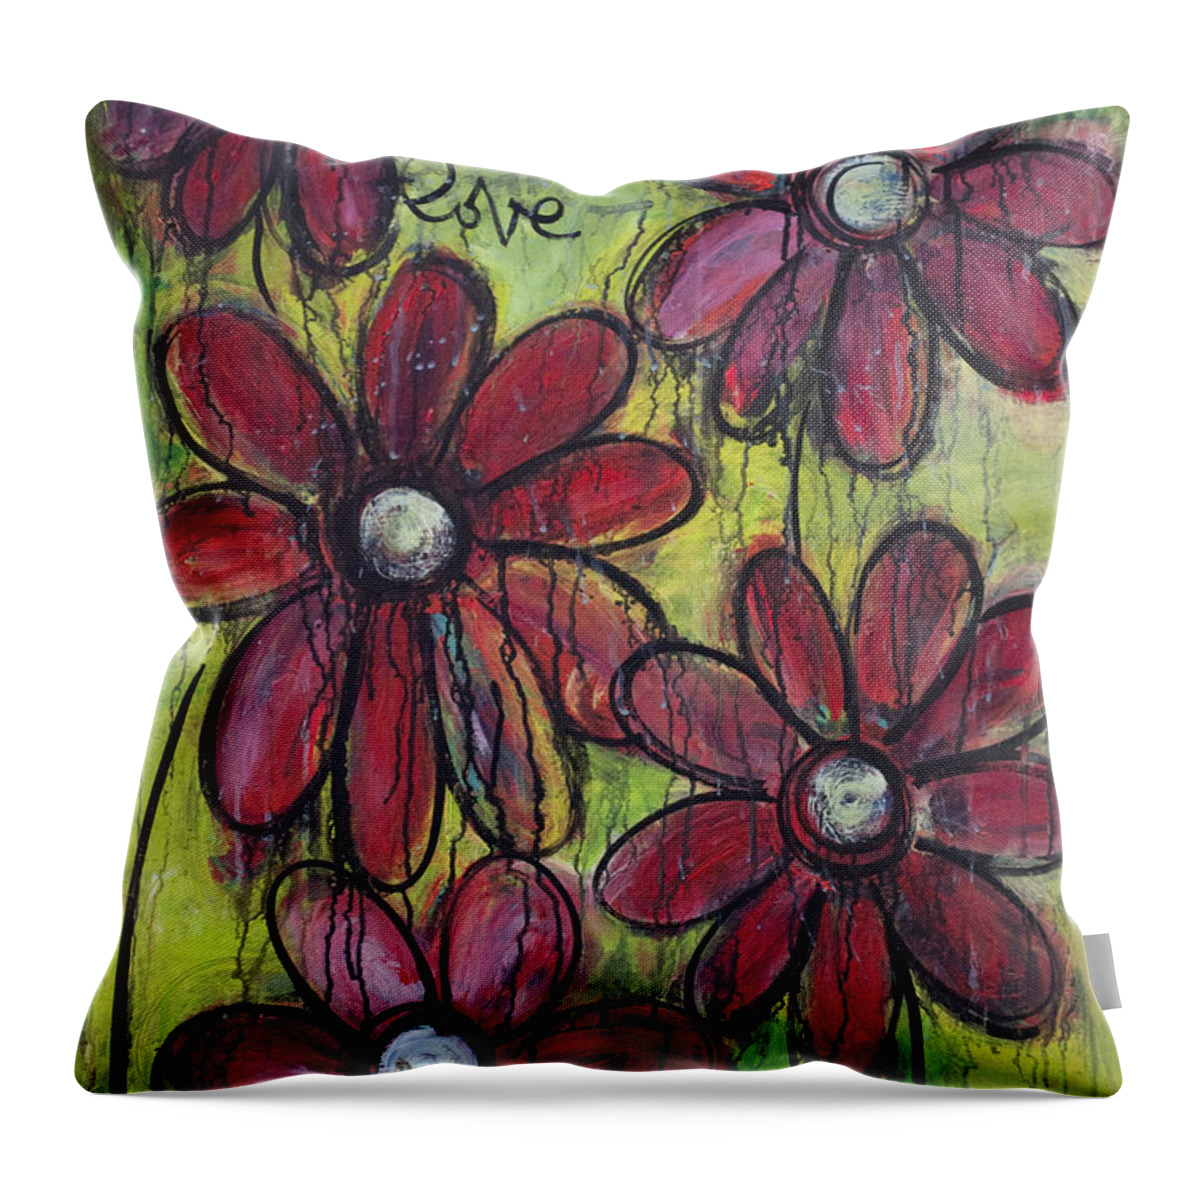 Daisies Throw Pillow featuring the painting Love For Five Daisies by Laurie Maves ART